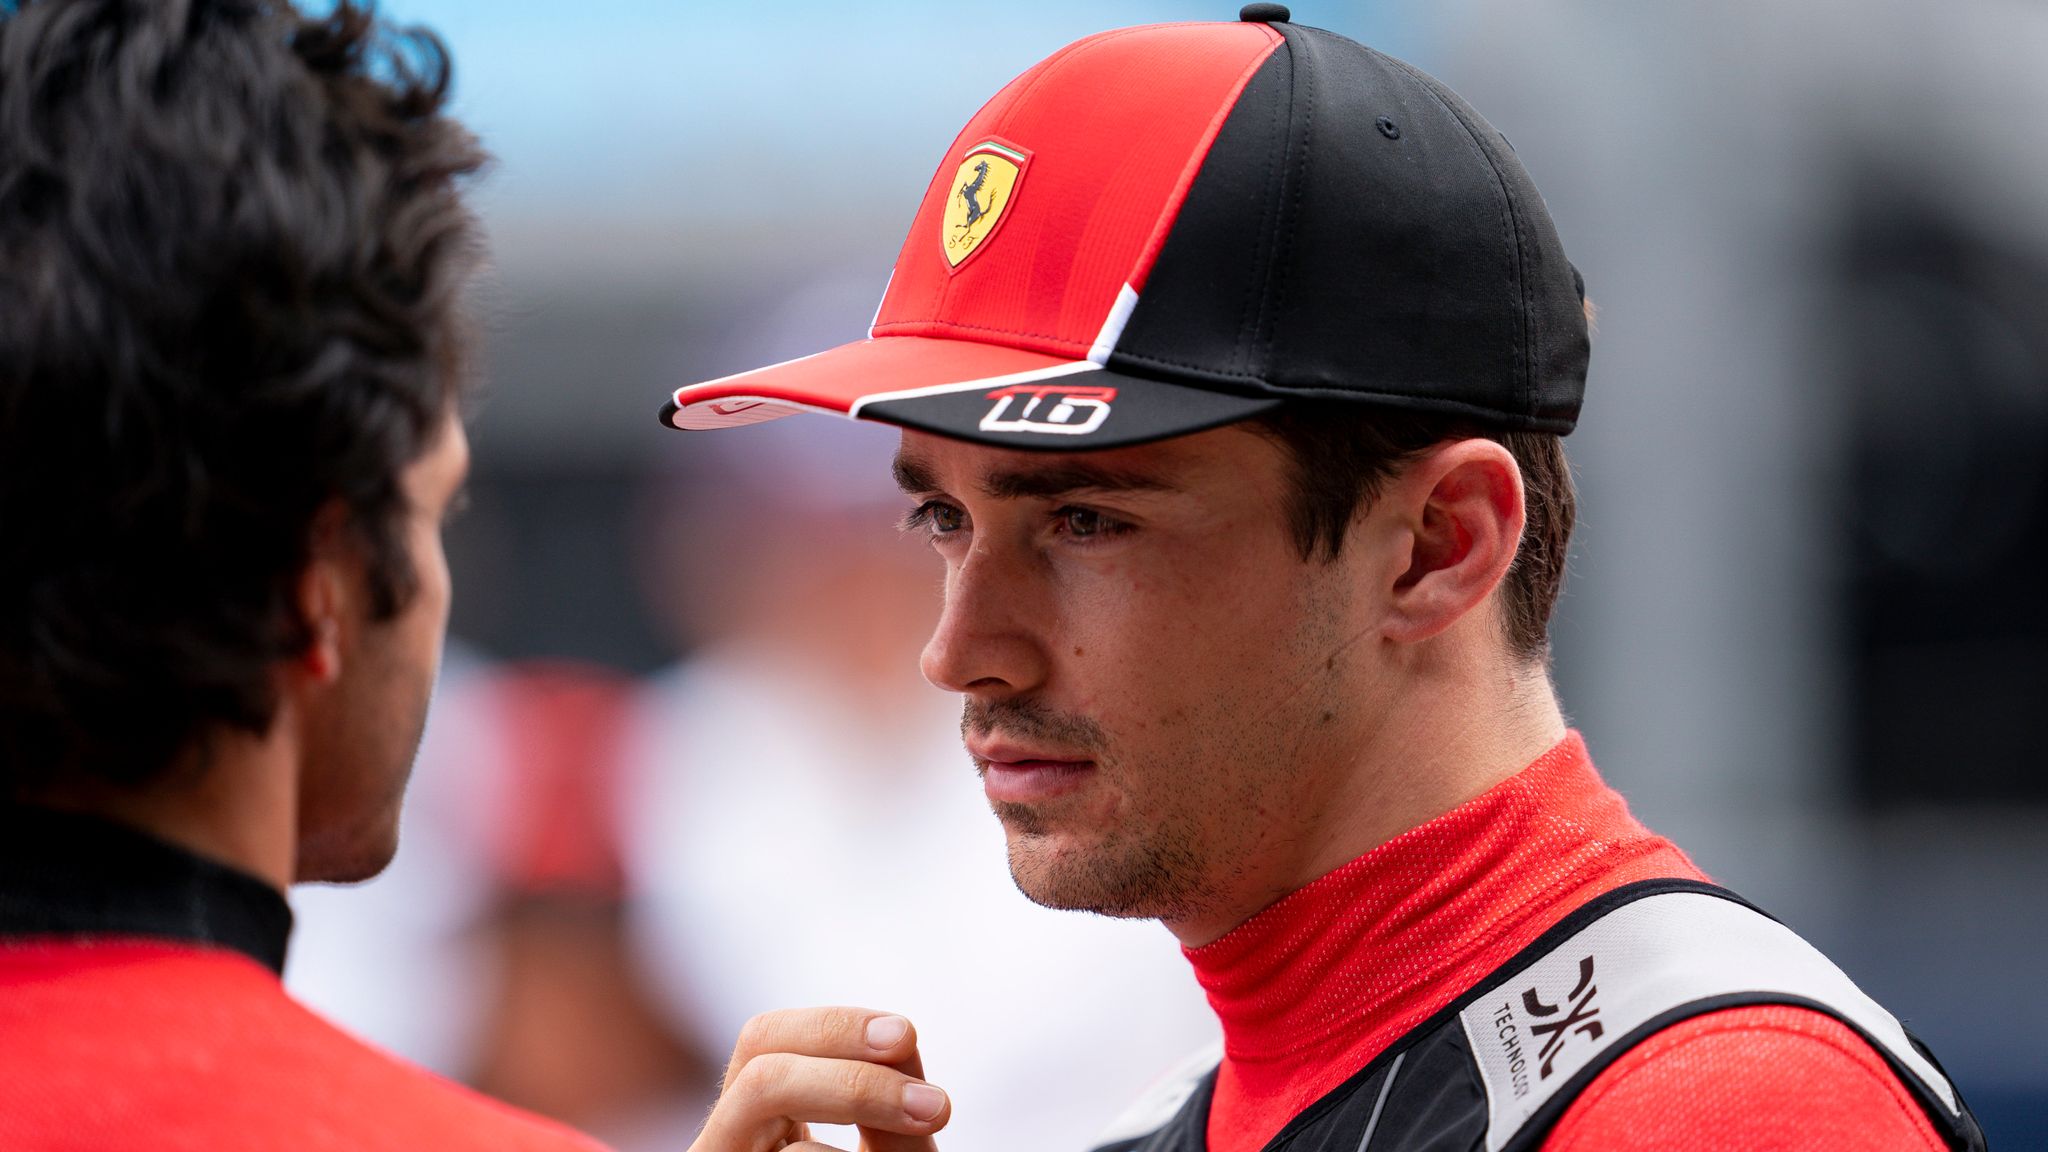 Charles Leclerc reveals FRUSTRATION after second strong session for Ferrari  